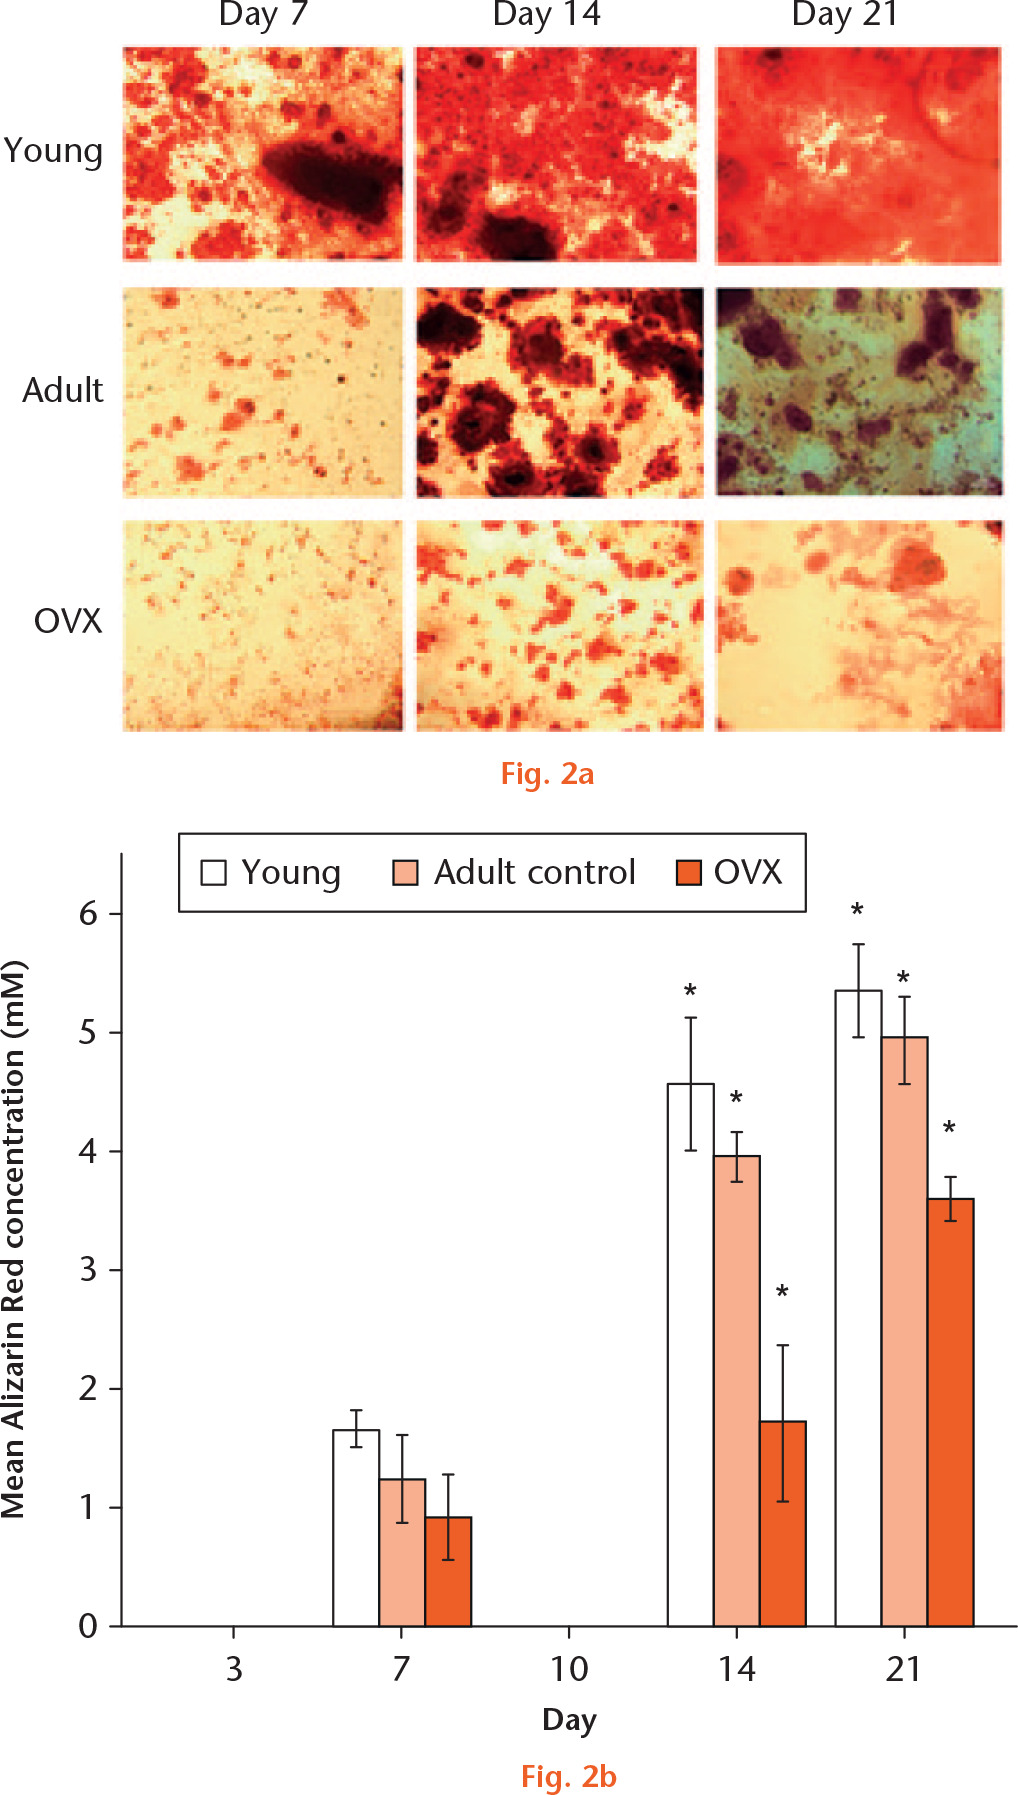  
            a) Alizarin staining to show osteogenic differentiation of young, adult, and ovariectomized (OVX) mesenchymal stem cells (MSCs) at day seven, 14, and 21. b) Graph showing the mean Alizarin Red production when MSCs from young, adult control, and OVX rats (n = 3) differentiated to osteoblasts at days seven, 14, and 21. *Significant difference of p < 0.05 using a two-tailed Student’s t-test.
          